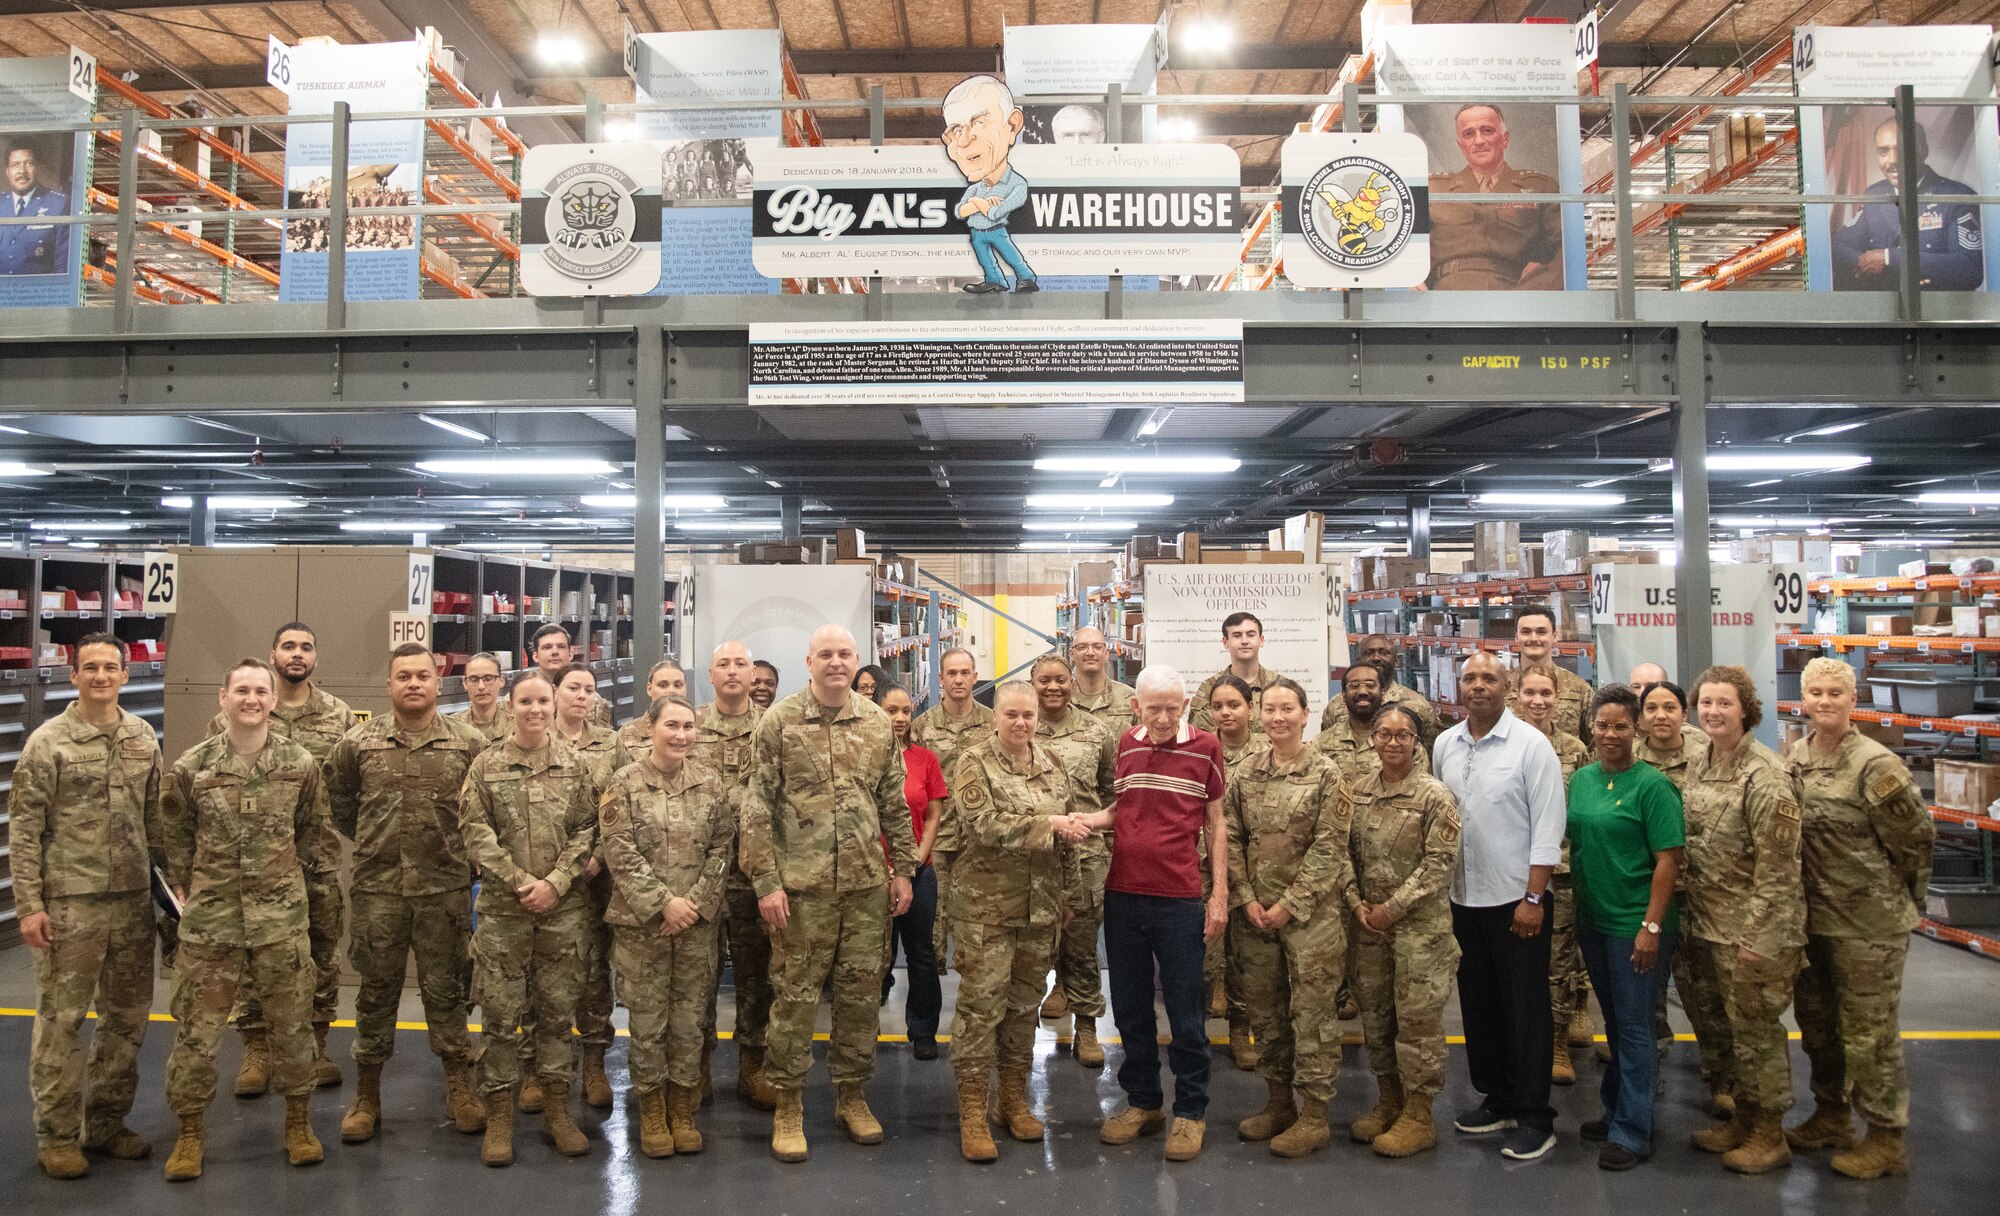 U.S. Air Force Lt. Gen. Linda S. Hurry, Deputy Commander, Air Force Materiel Command and members of the 96th Logistics Readiness Squadron materiel management flight, pose for a group photo below Big Al’s Warehouse sign inside the 96 LRS warehouse at Eglin Air Force Base, Fla.